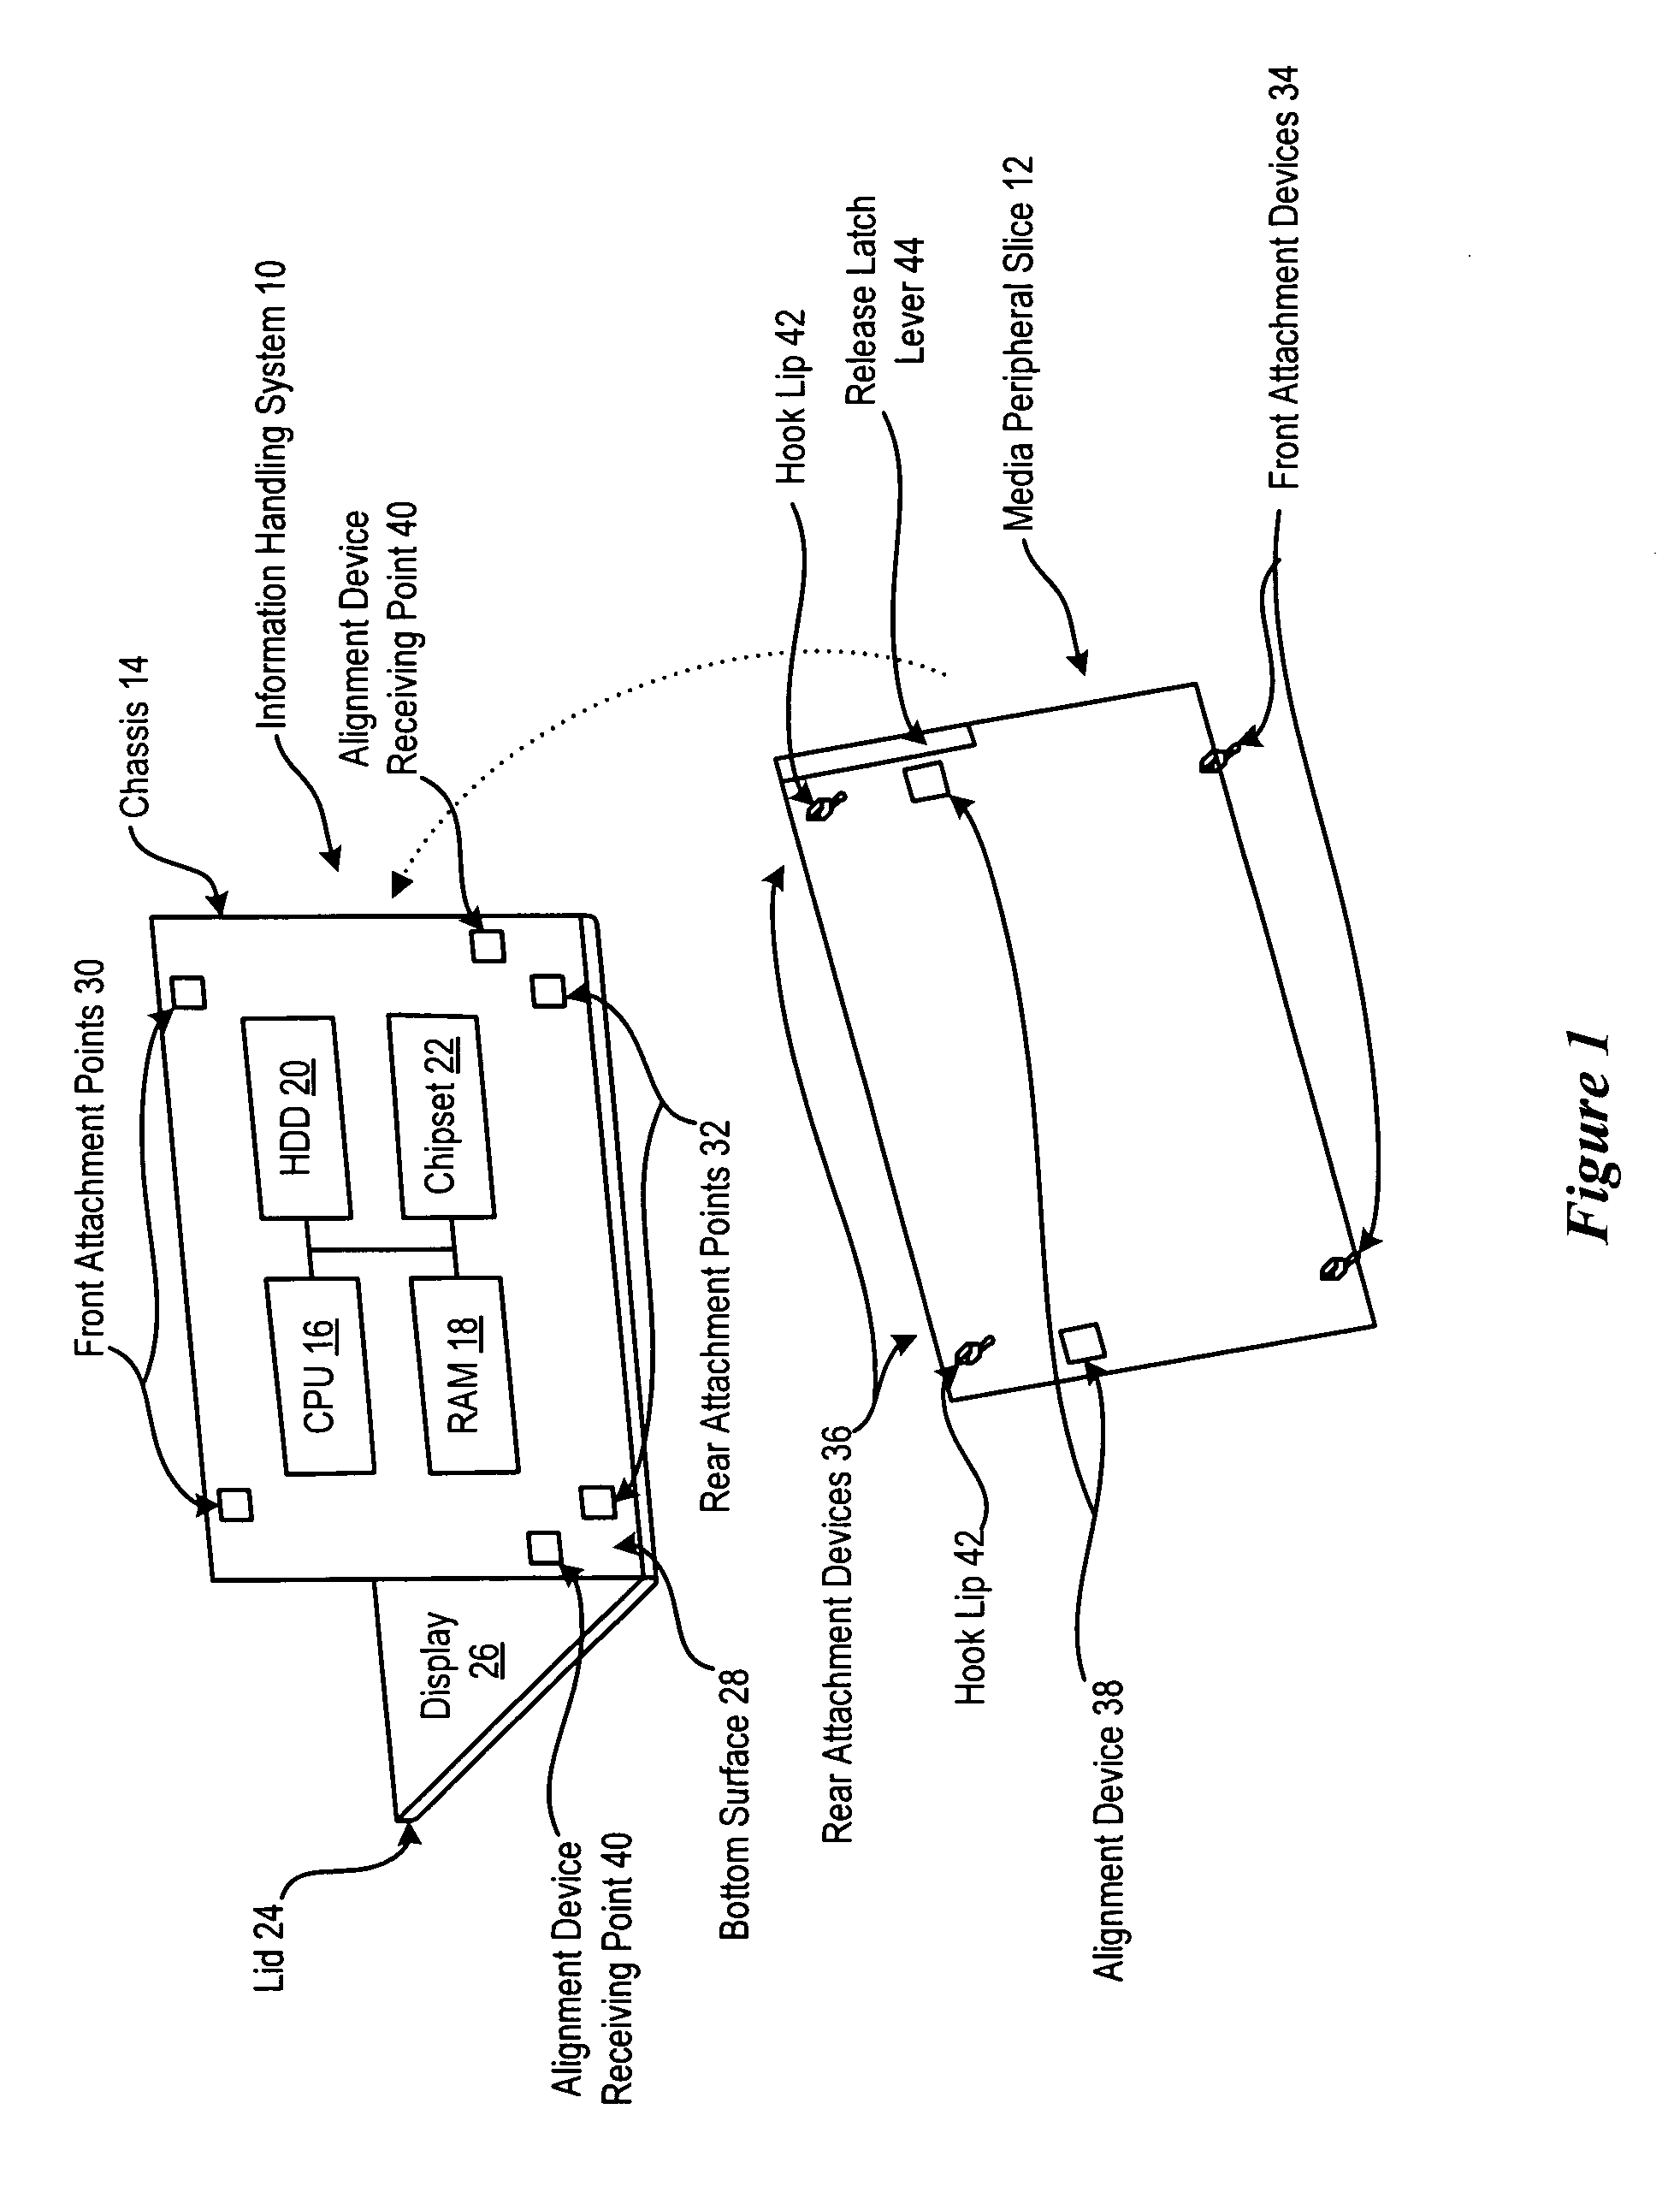 System and method for releasing a peripheral slice from an information handling system